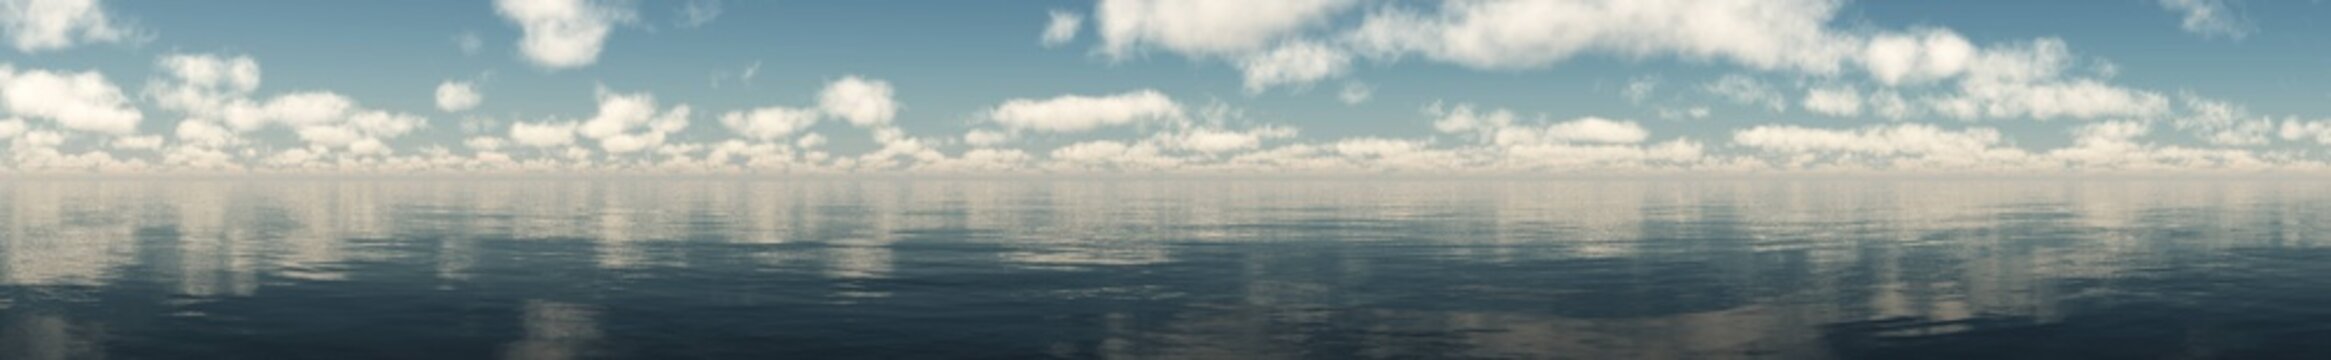 panorama of clouds over the ocean, seascape with clouds,
3D rendering
